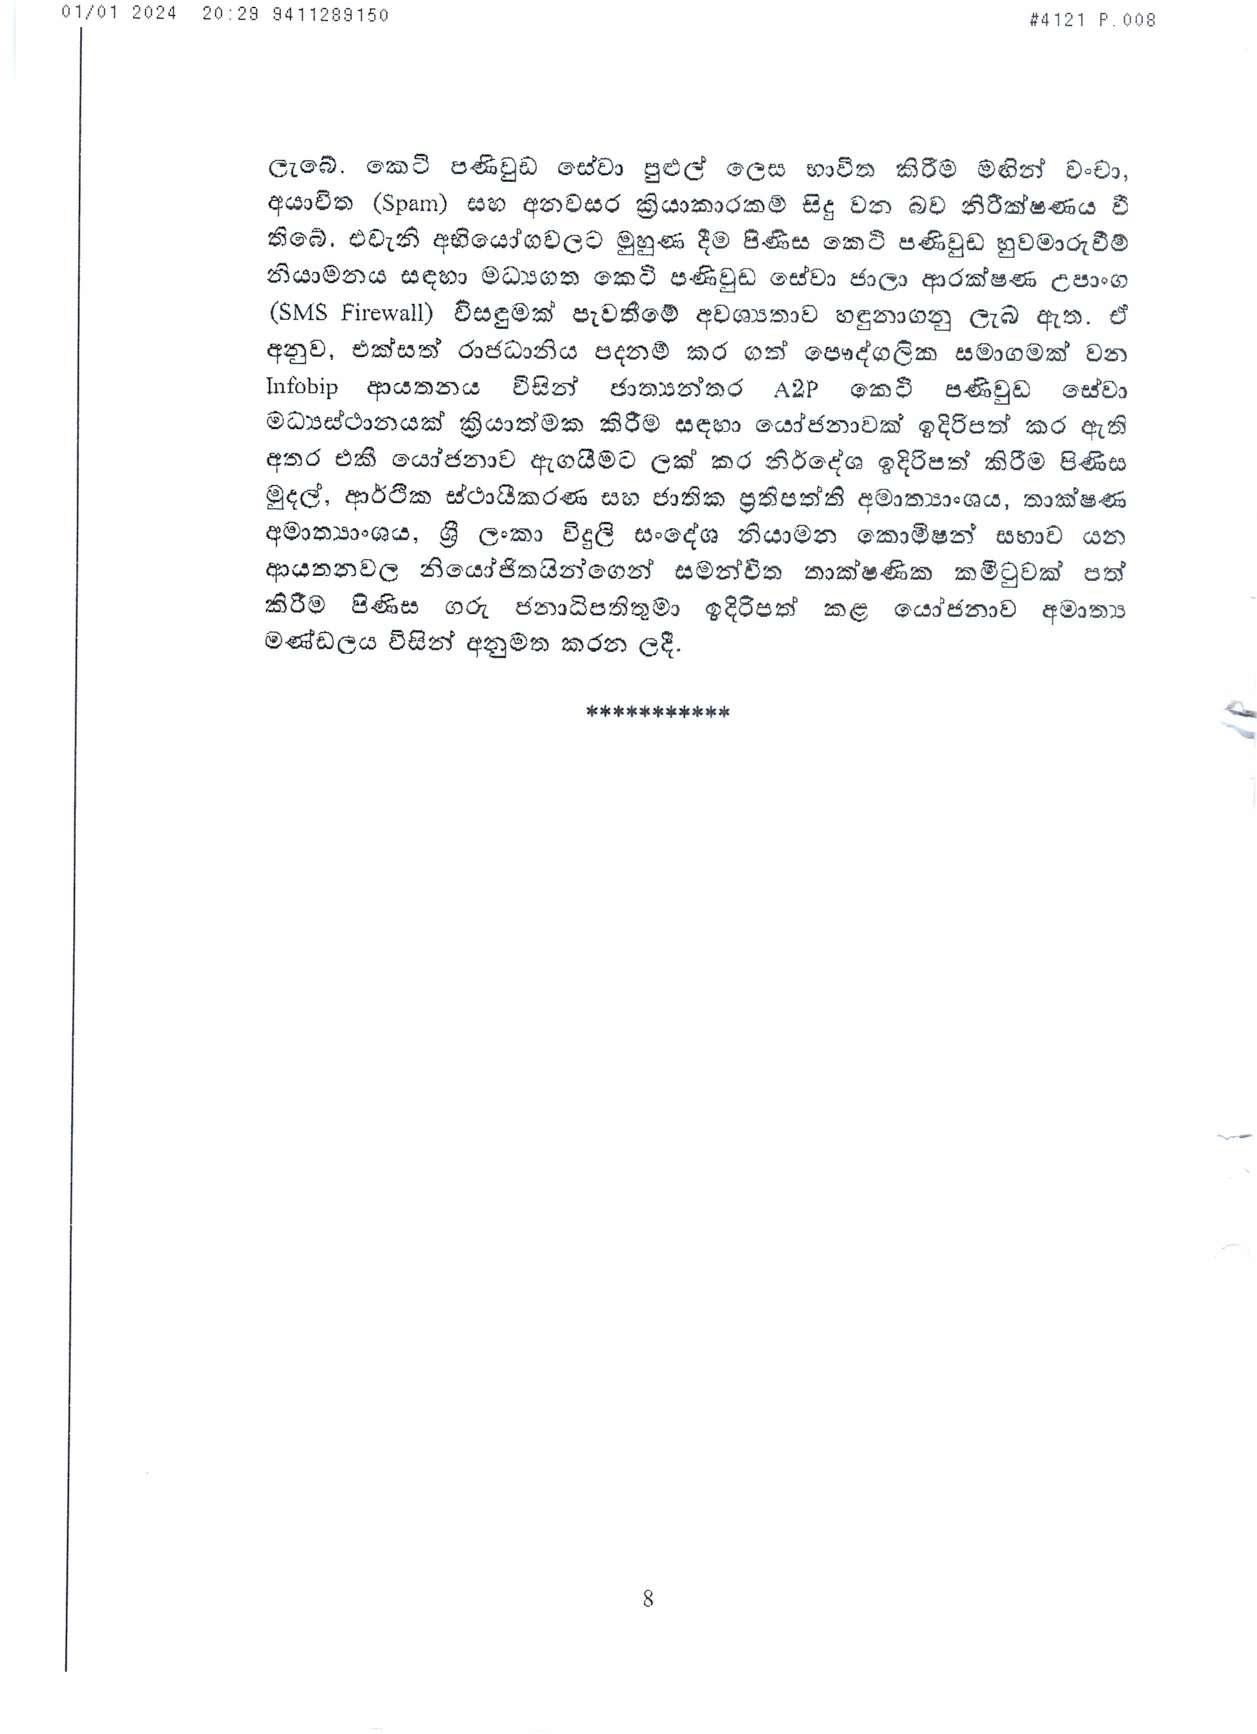 Cabinet Decision on 01.01.2024 page 008